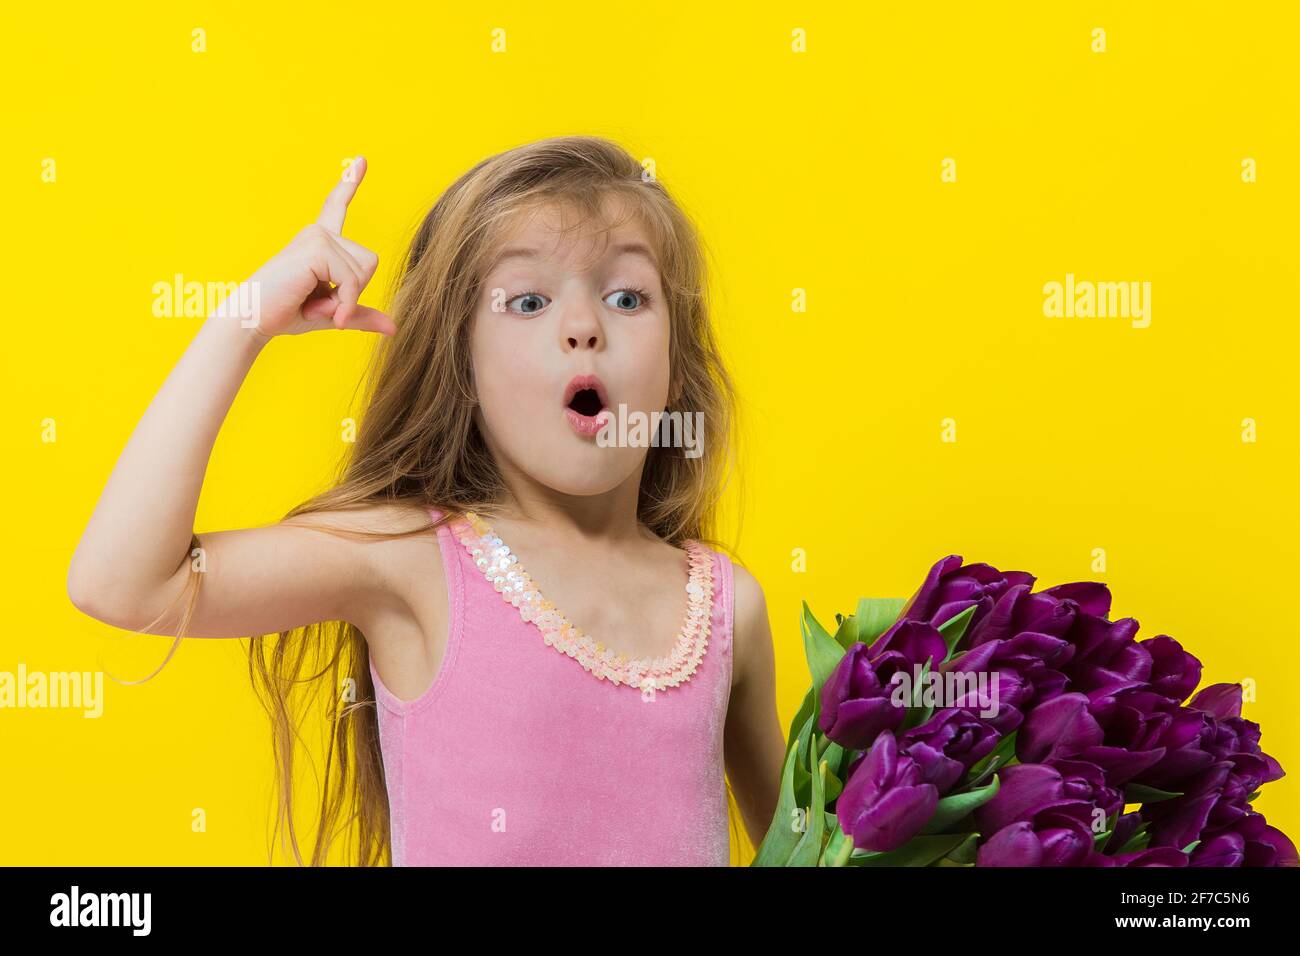 Cute little girl holding bunch of flowers on the yellow background in the studio. Stock Photo